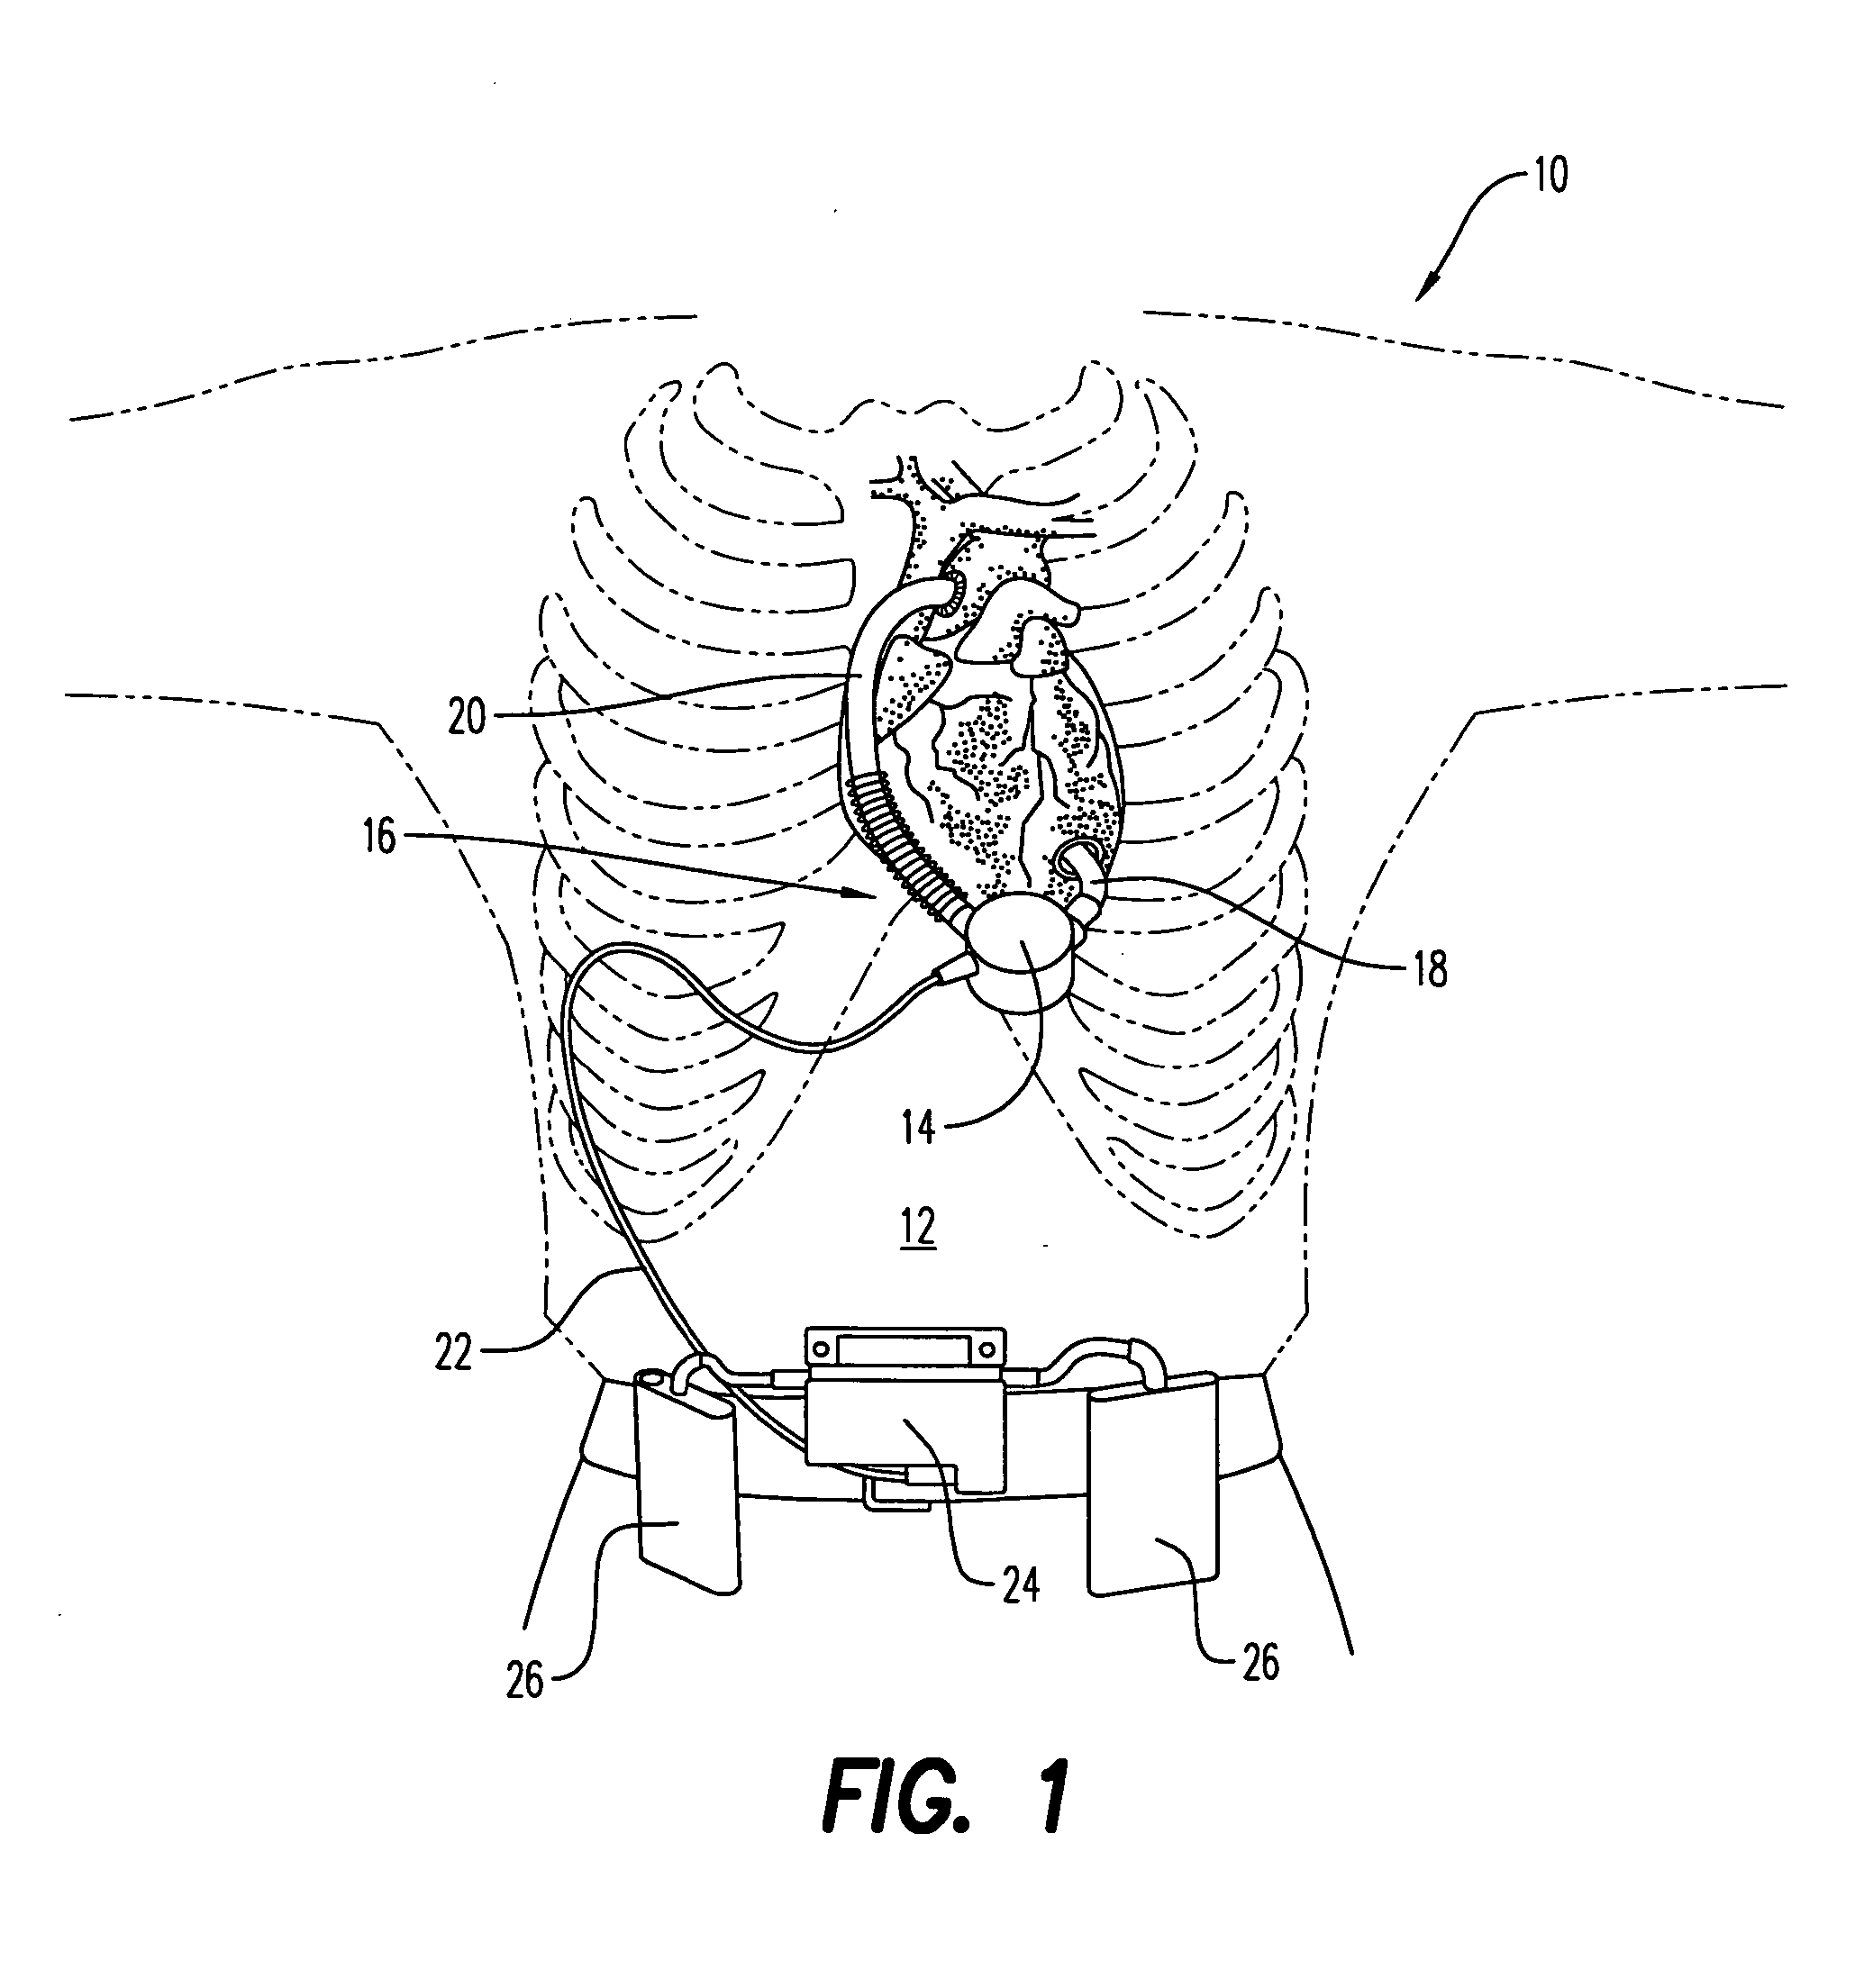 Adjustable coupling mechanism for the conduit on a ventricular assist device